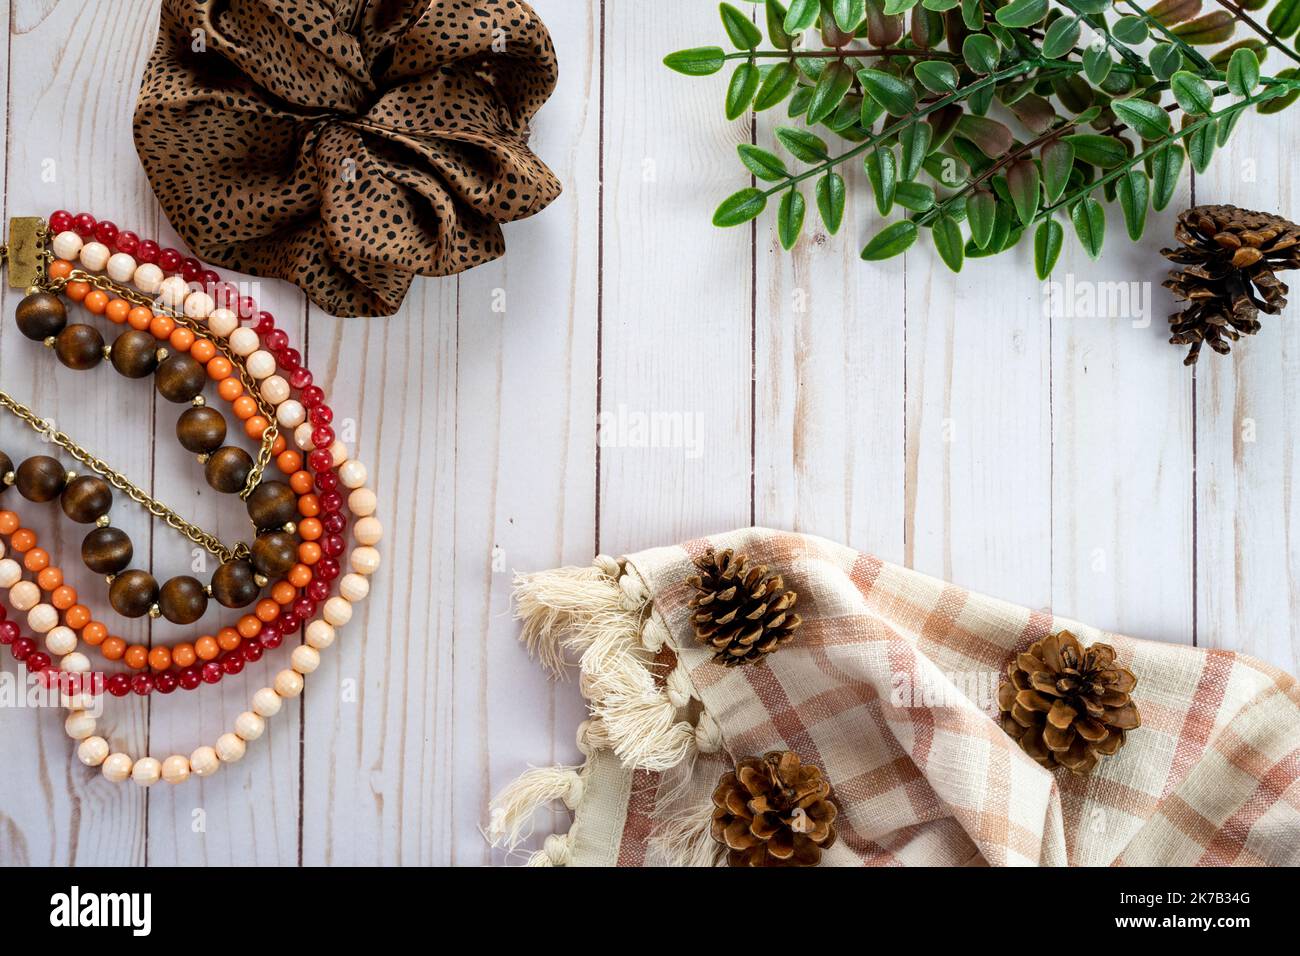 Trendy flat lay top down view with a brown scrunchie, pine cones, plaid towel, green leaves, and a coral pink beaded necklace Stock Photo